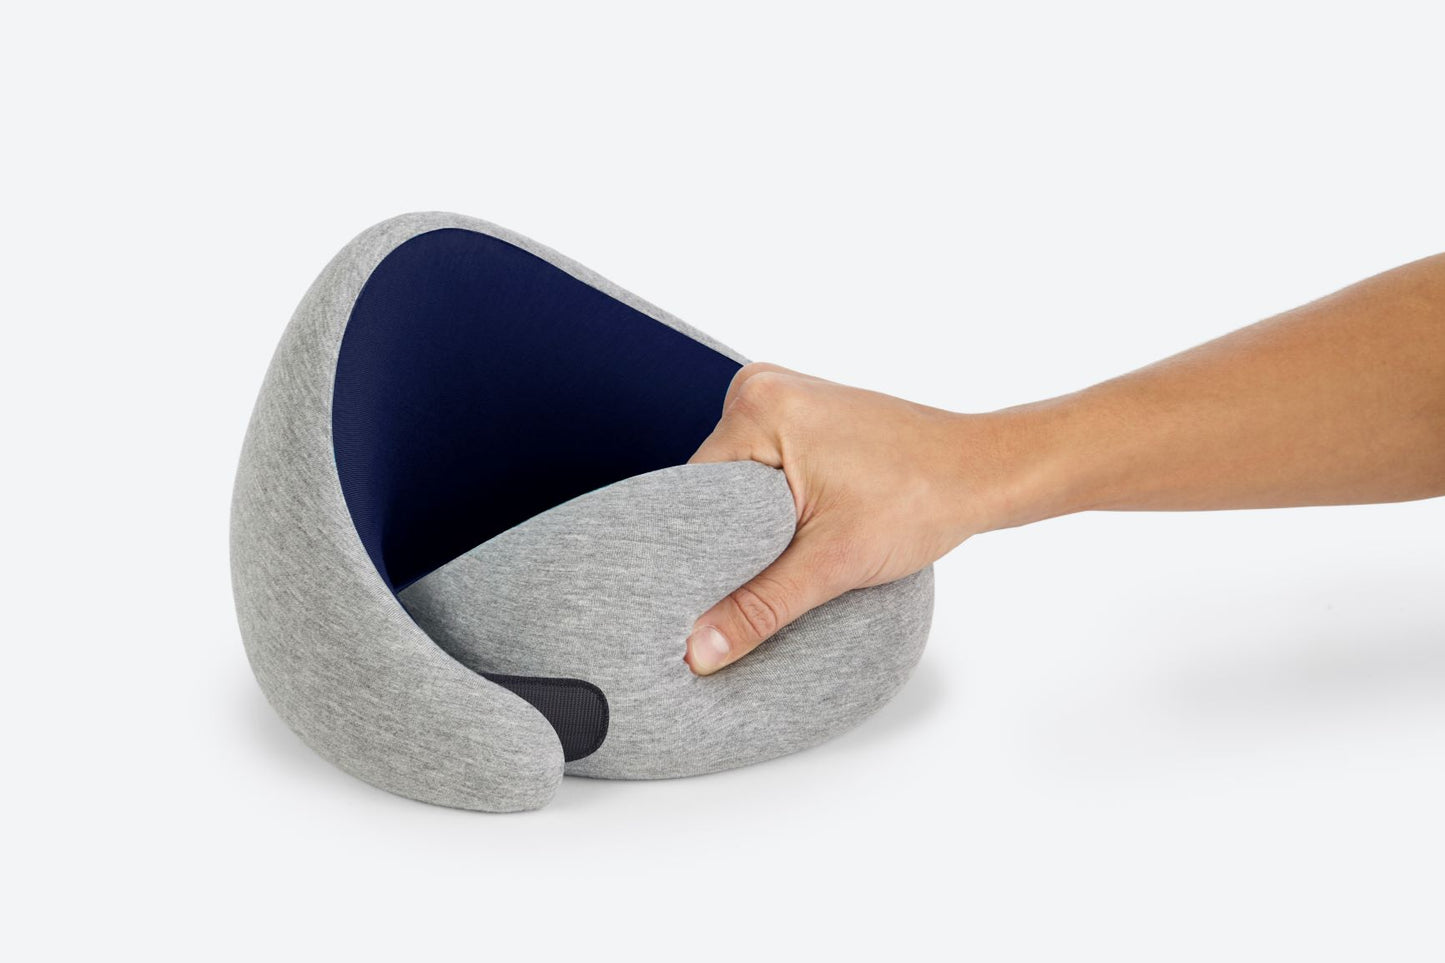 Pressing On The Deep Blue Neck Pillow.